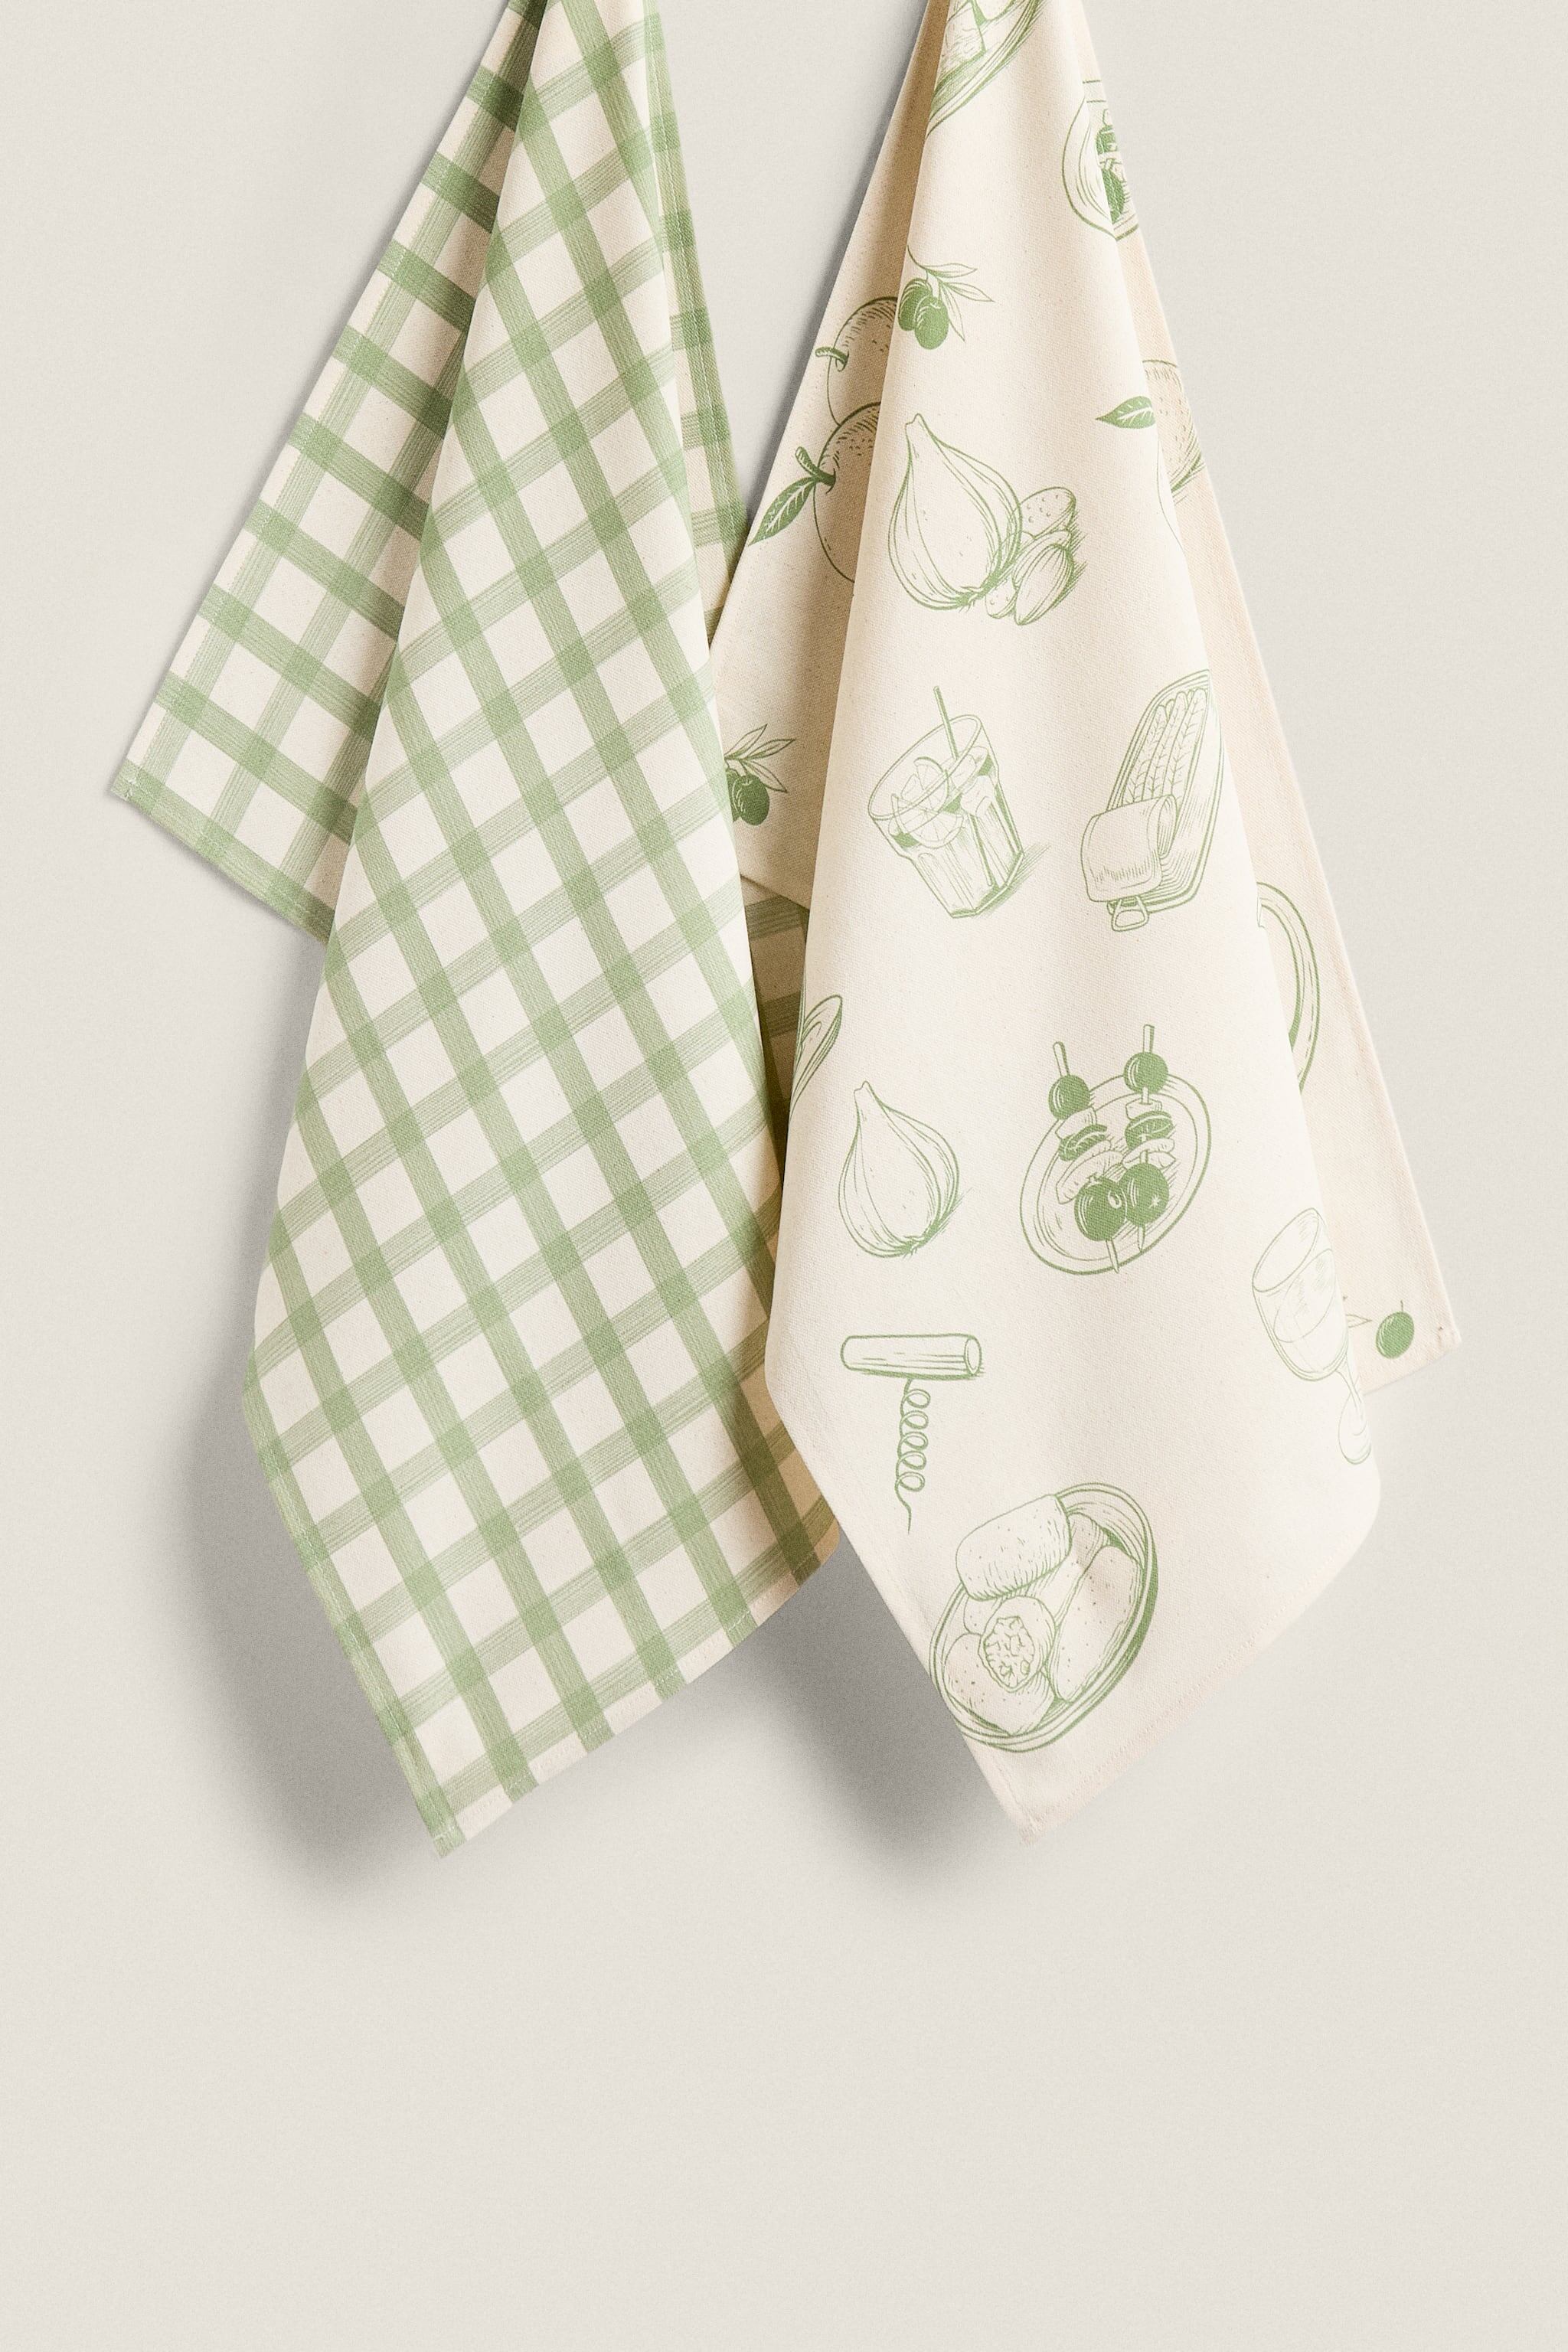 PACK OF TAPAS PRINT COTTON KITCHEN TOWELS (PACK OF 2)